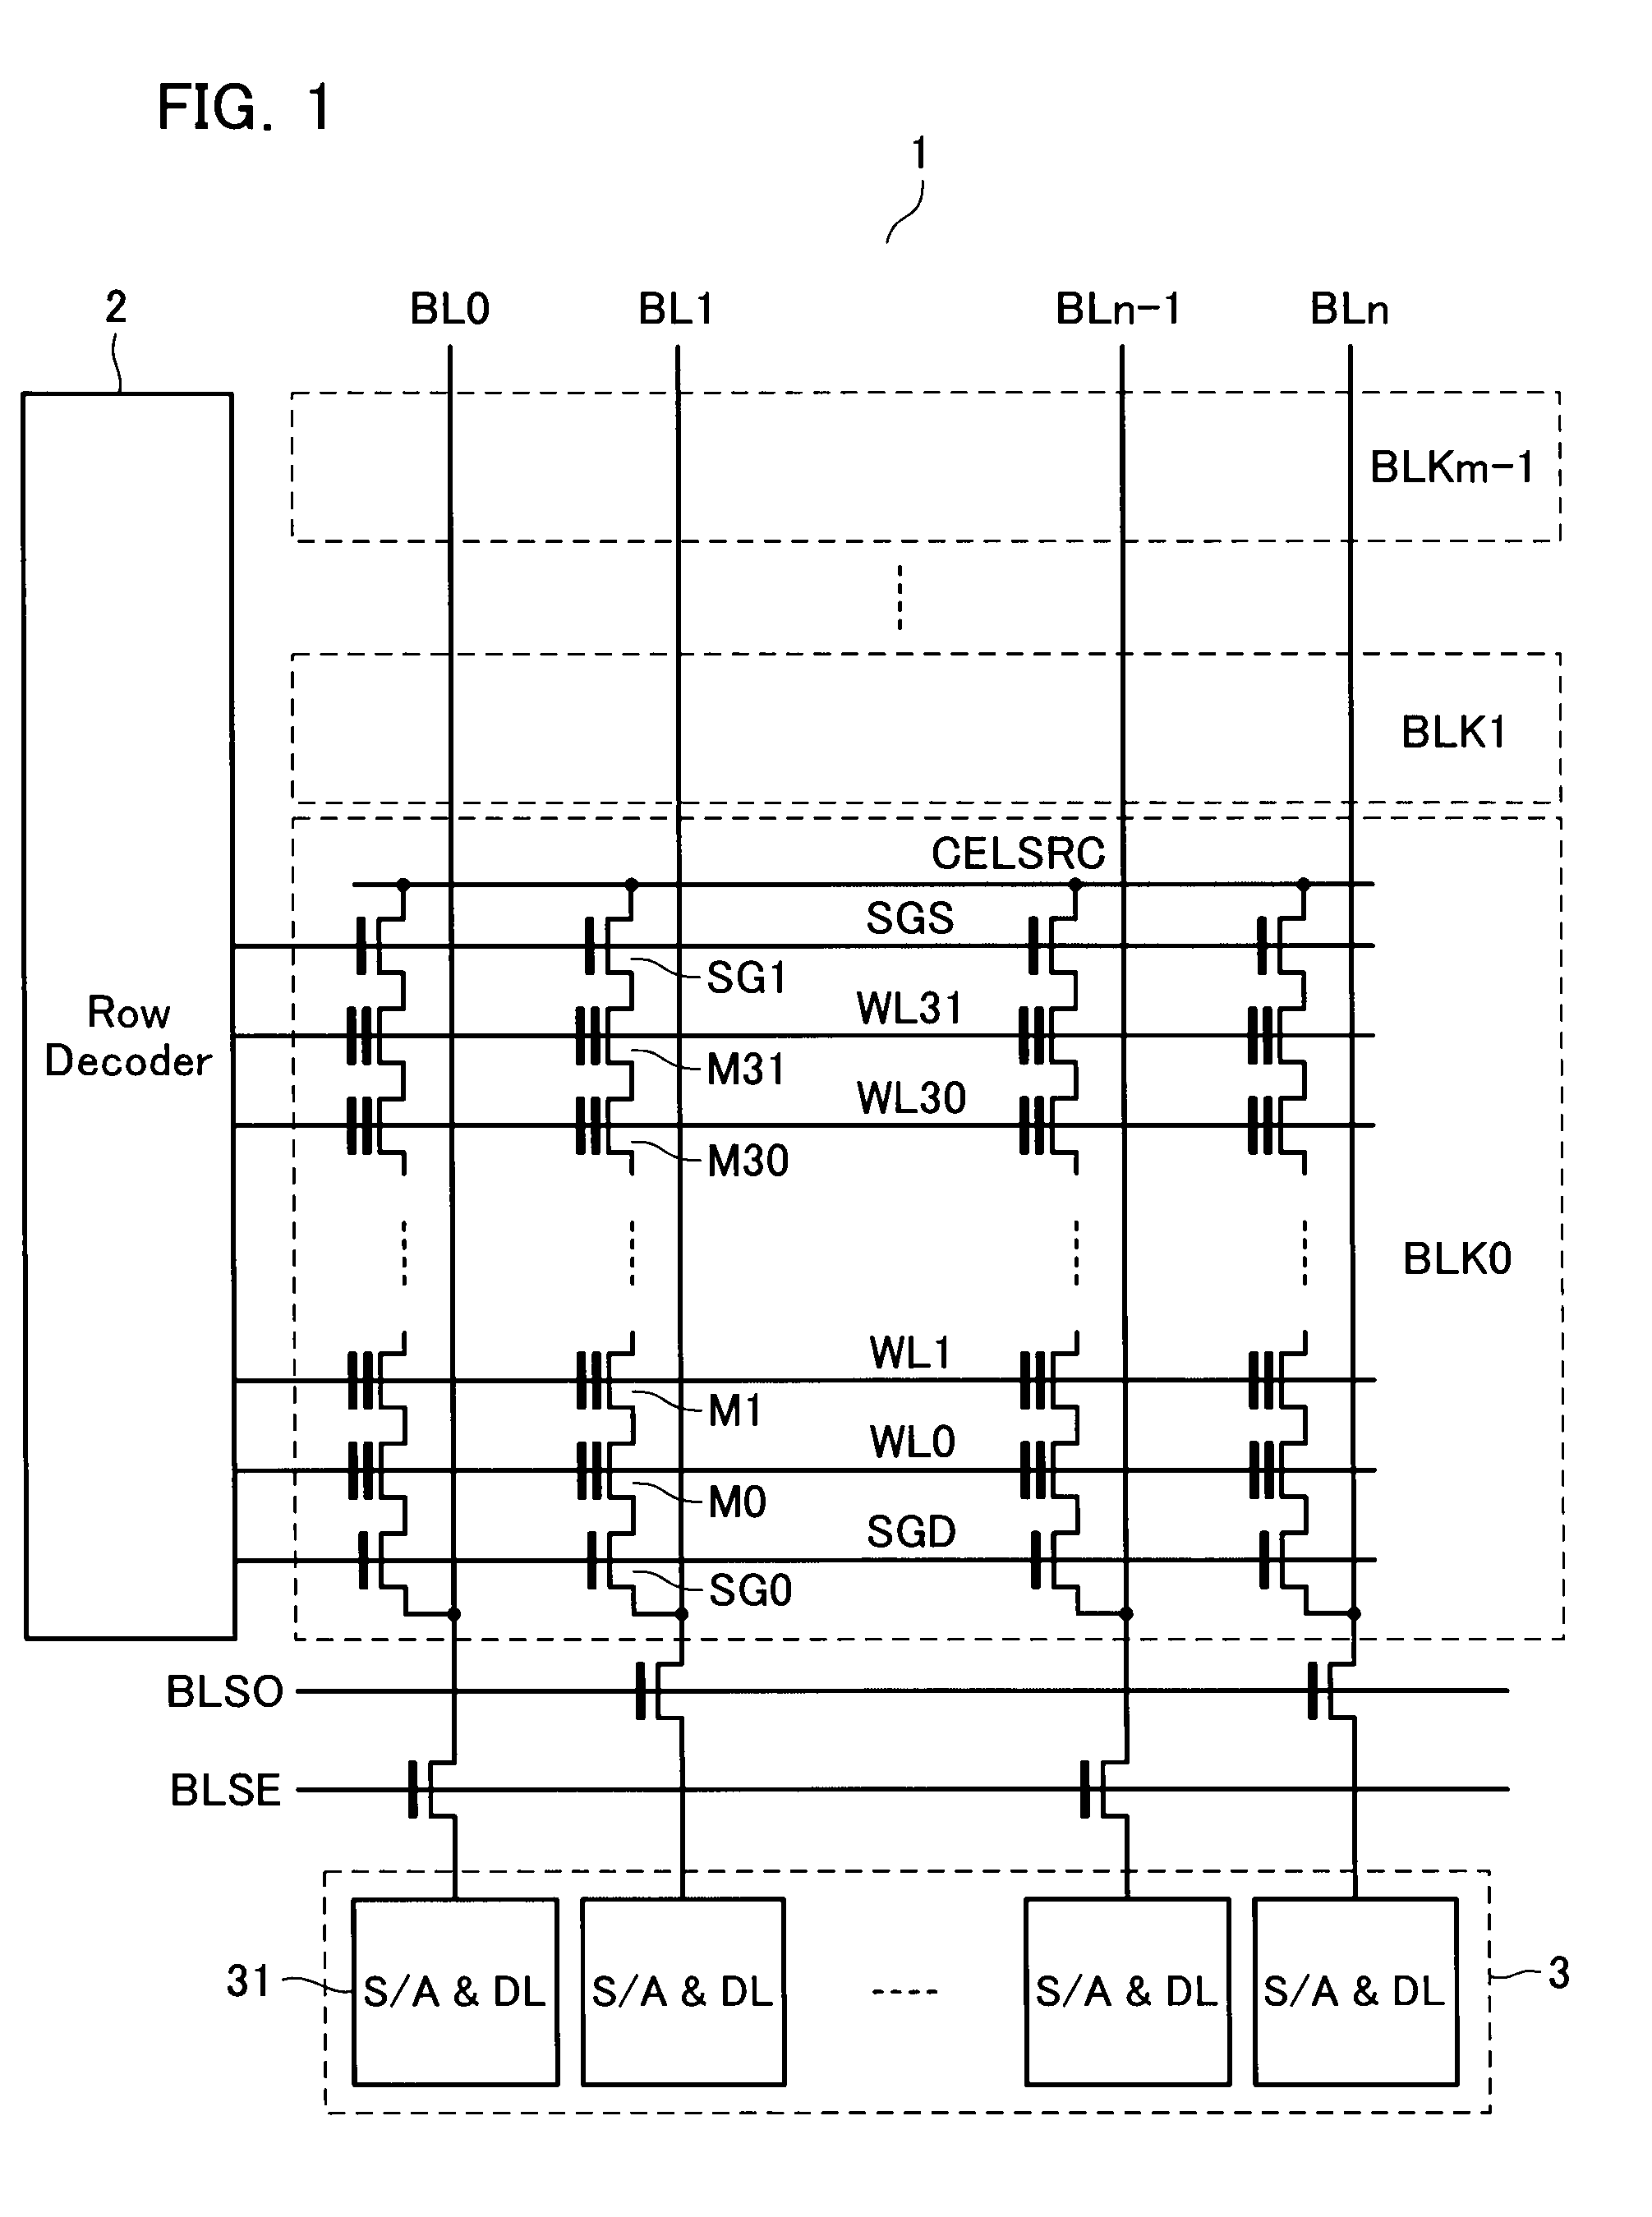 Method for programming a semiconductor memory device